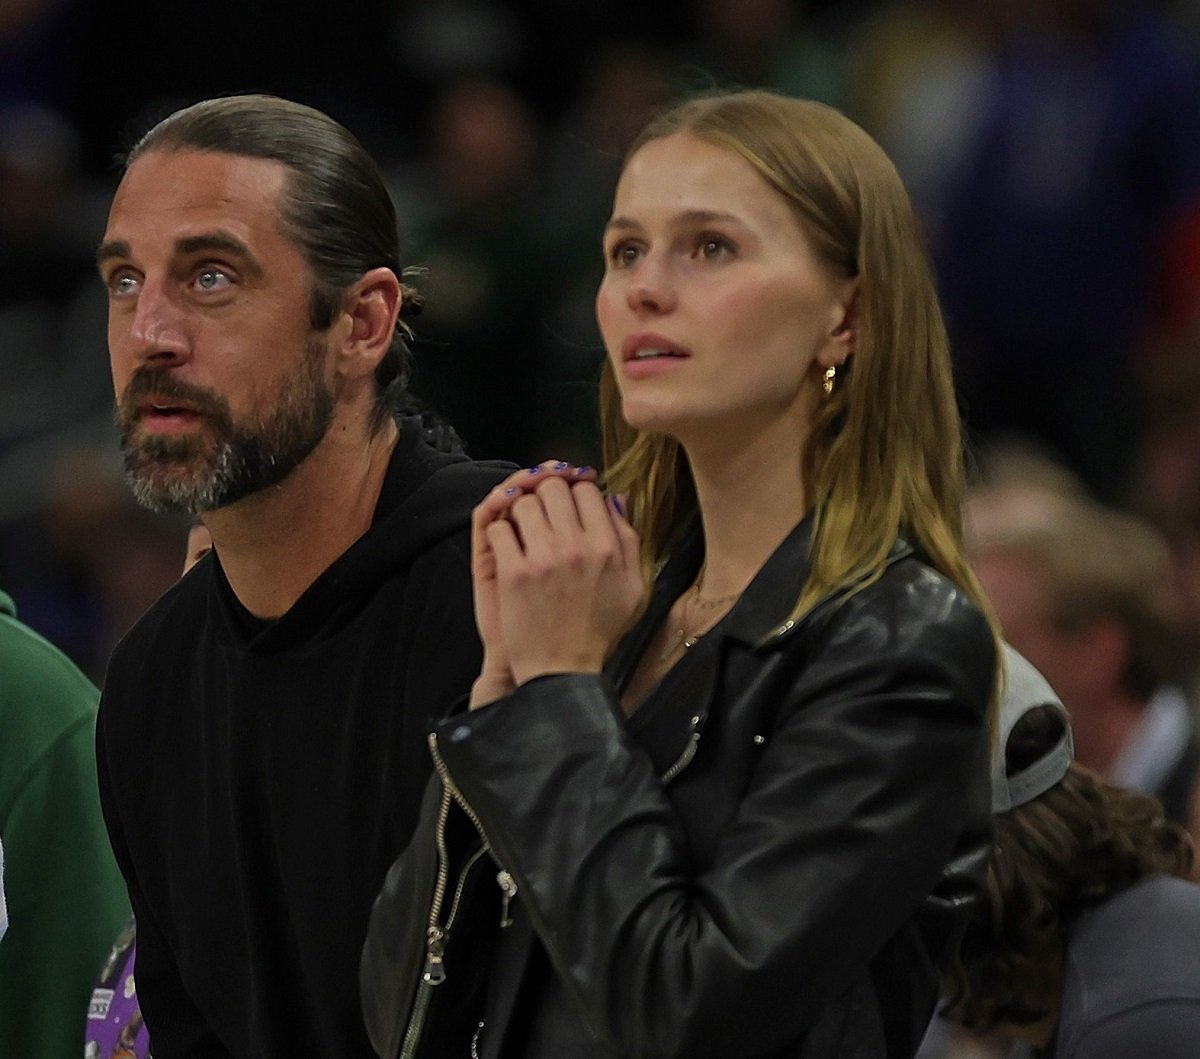 Aaron Rodgers and Mallory Edens watching Game 2 of the Eastern Conference First Round Playoffs between the Milwaukee Bucks and the Chicago Bulls